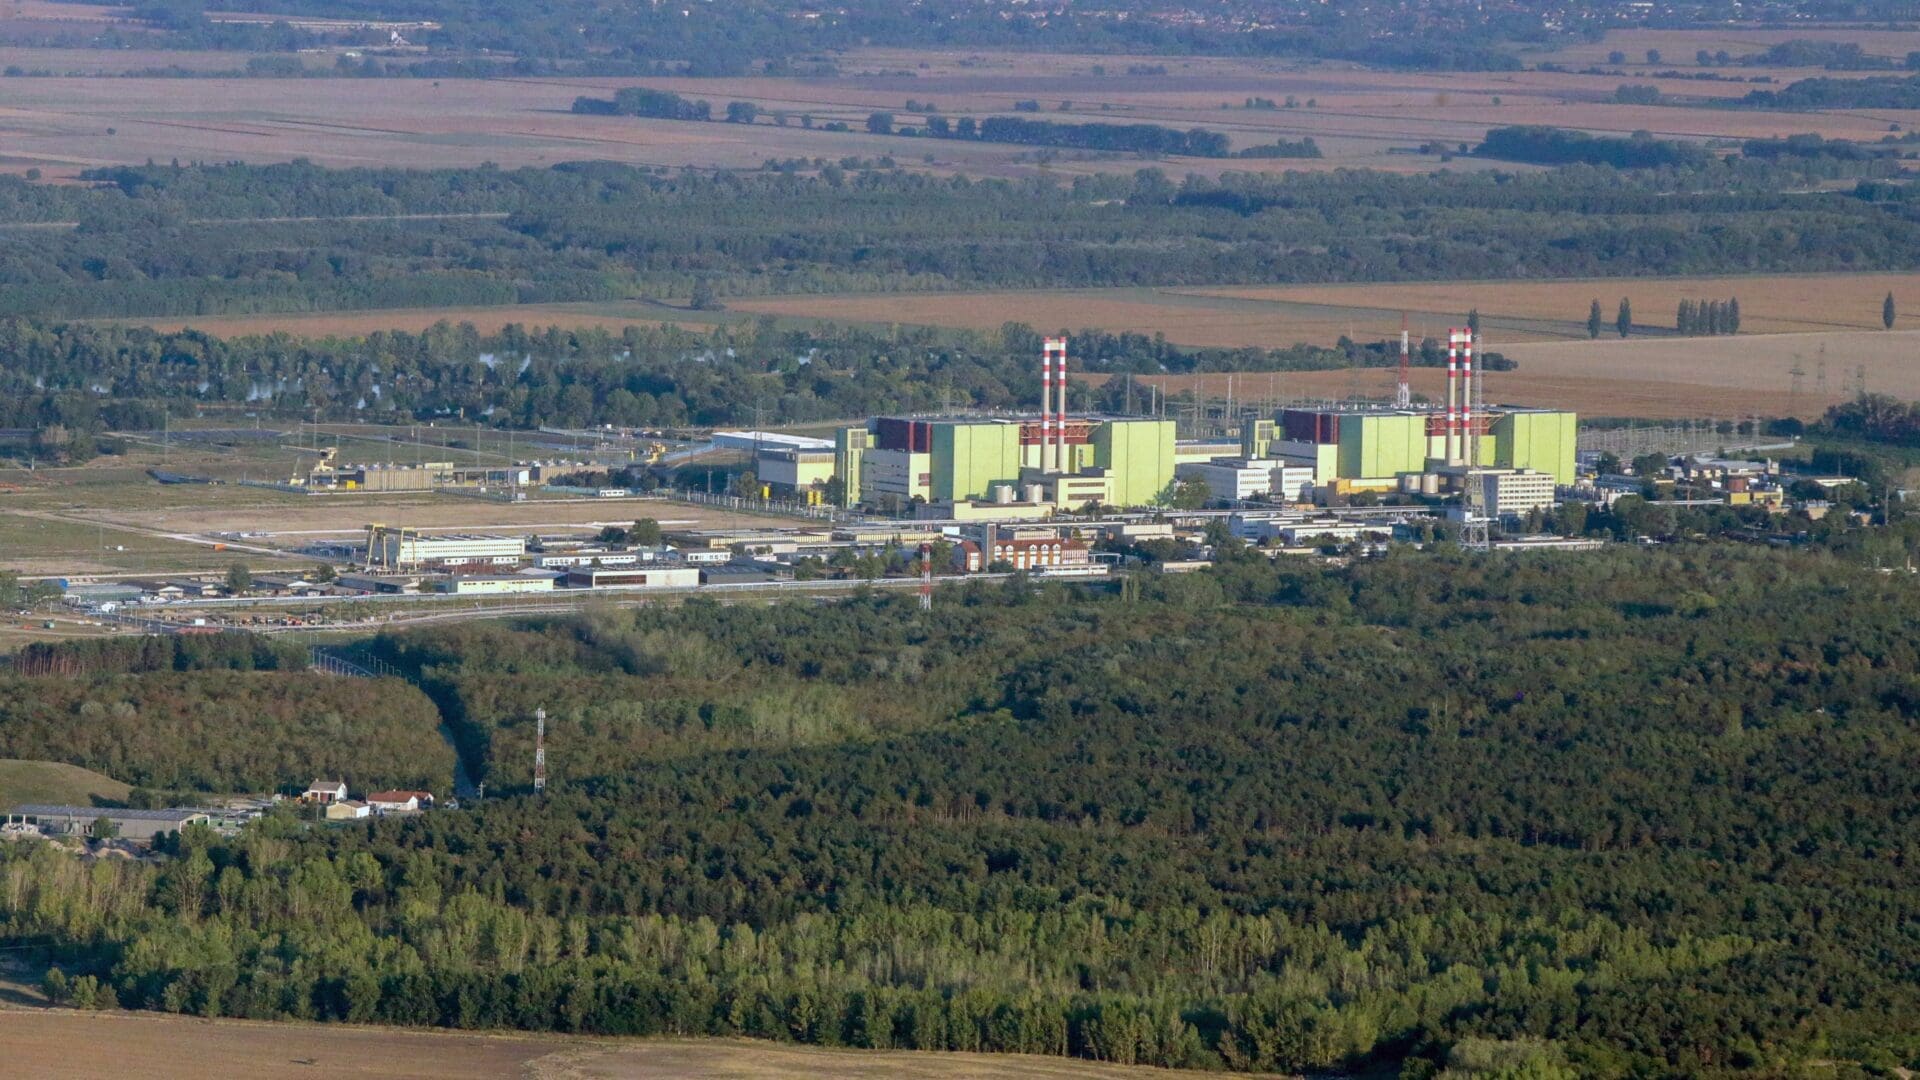 The Paks nuclear power station.